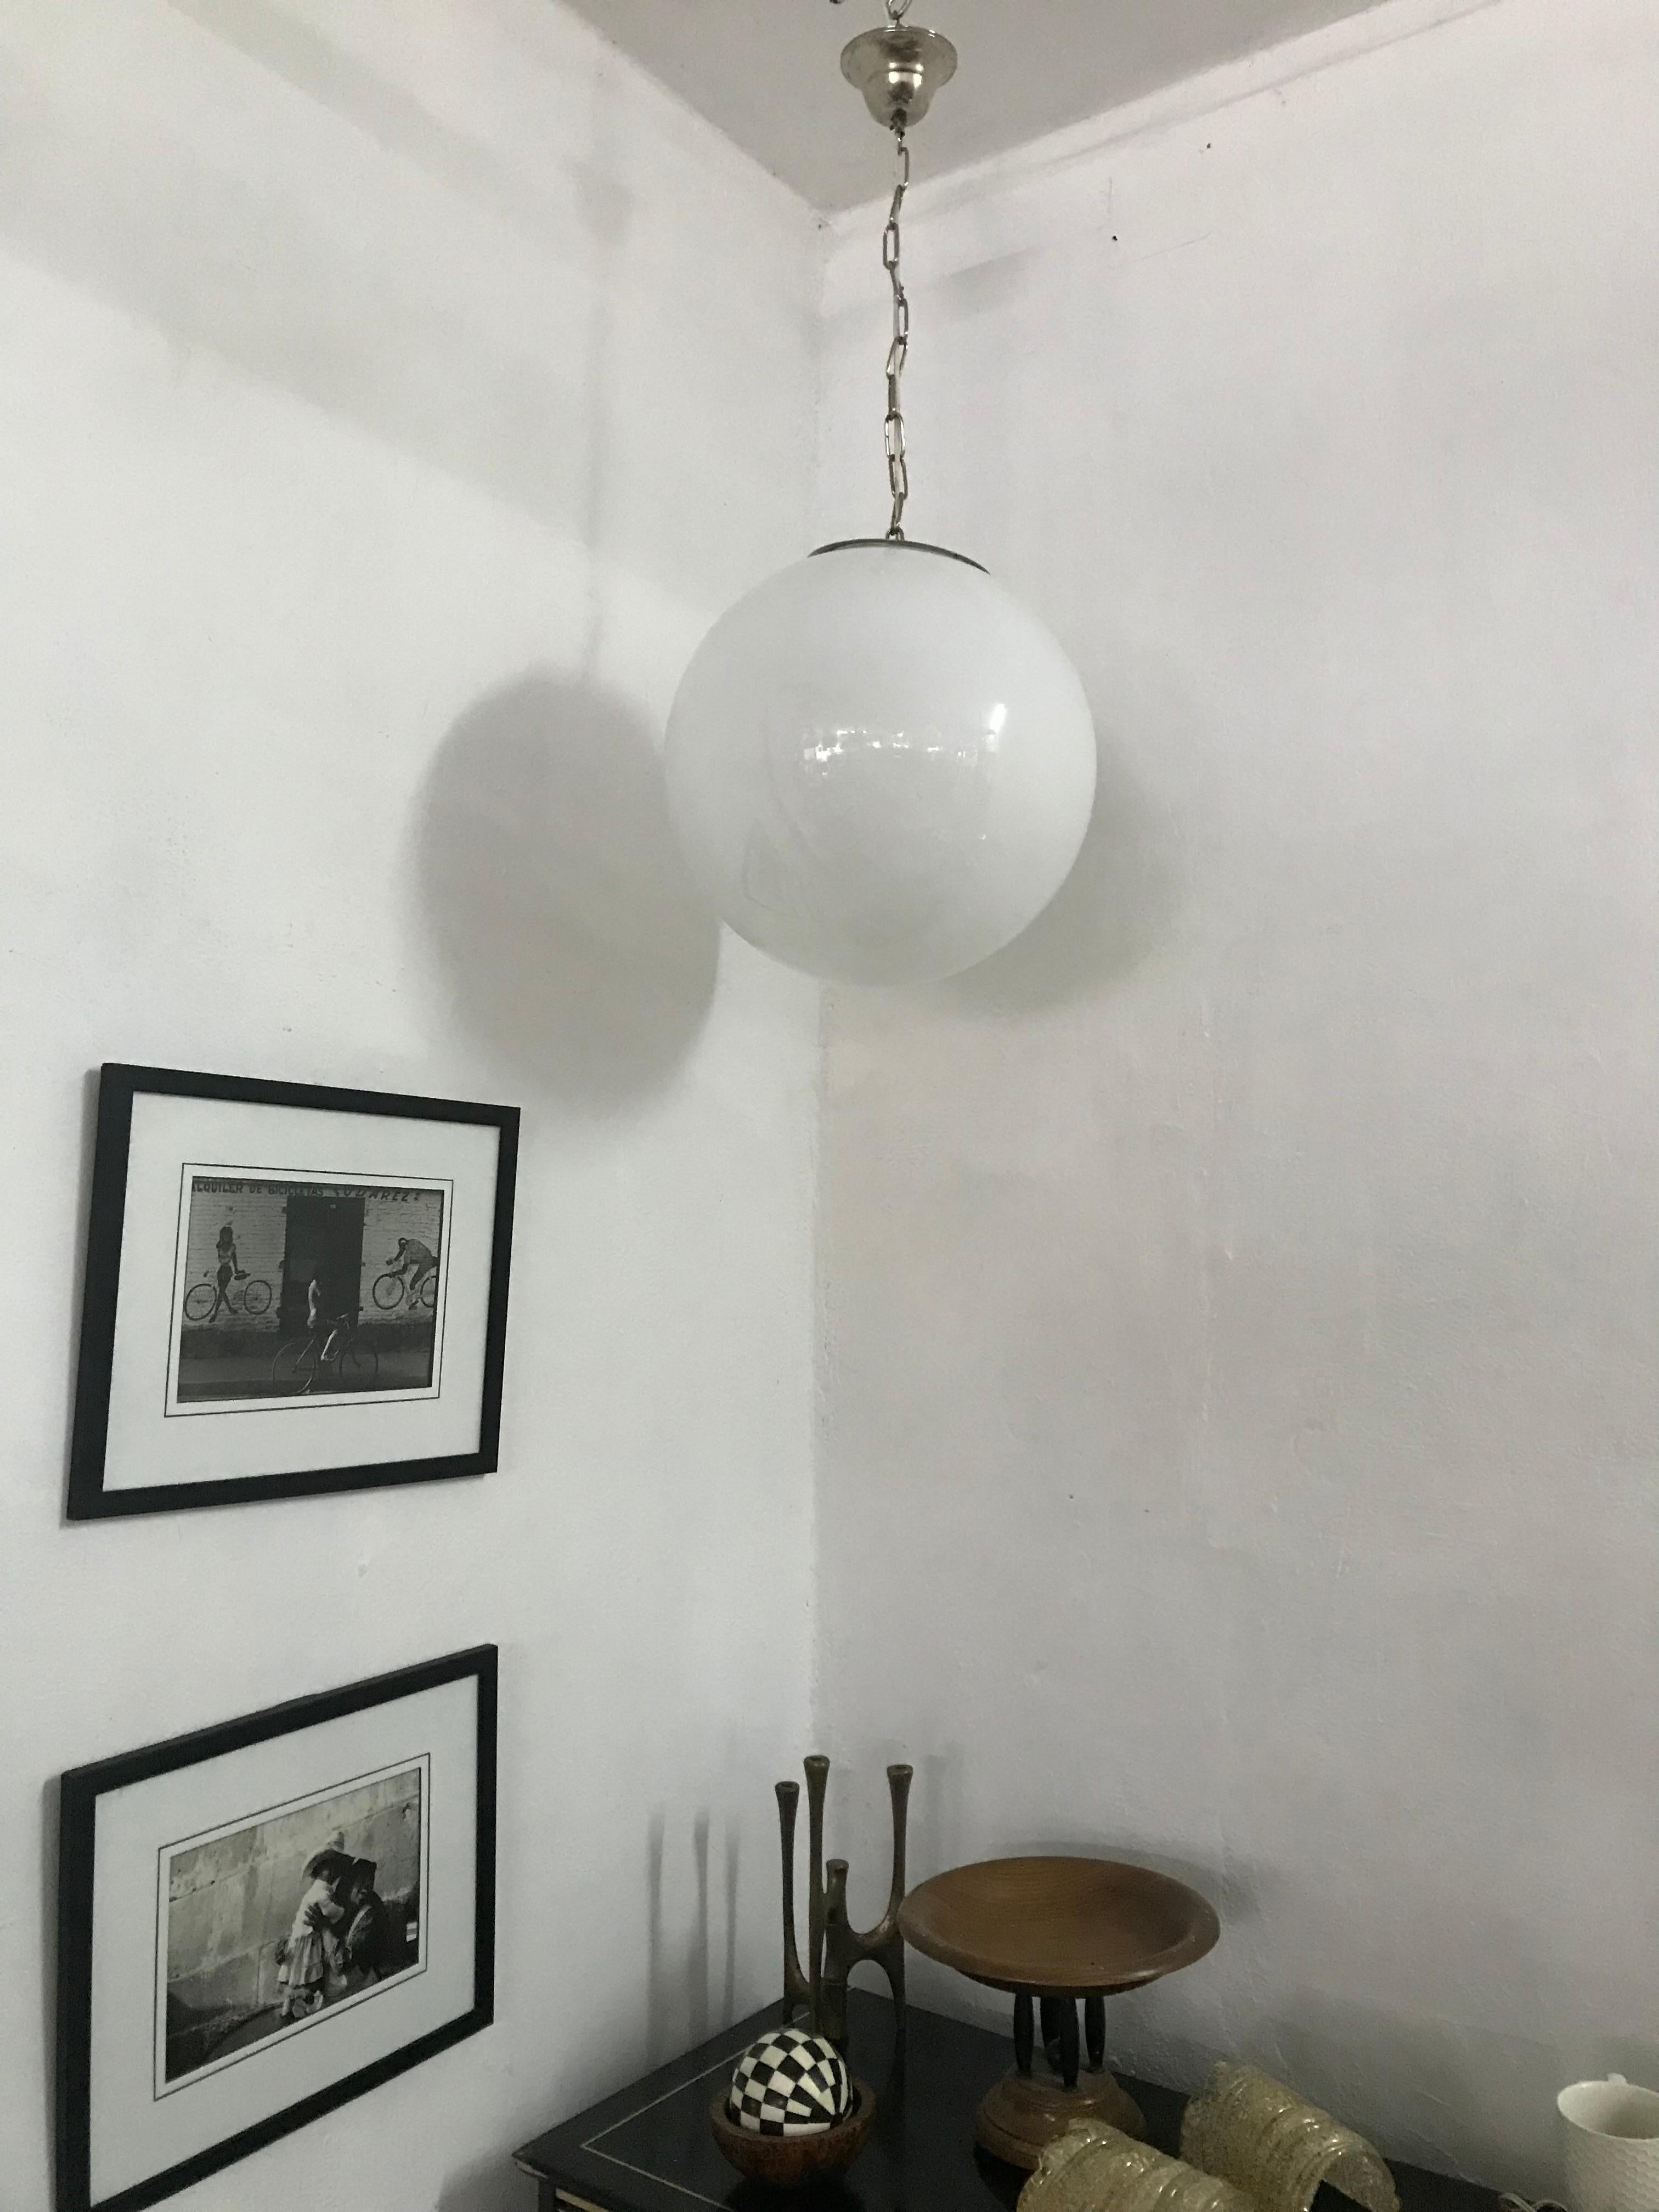 20th Century 2 Large Mid-Century Modern Murano Opaline Glass Sphere Chandeliers, circa 1970 For Sale